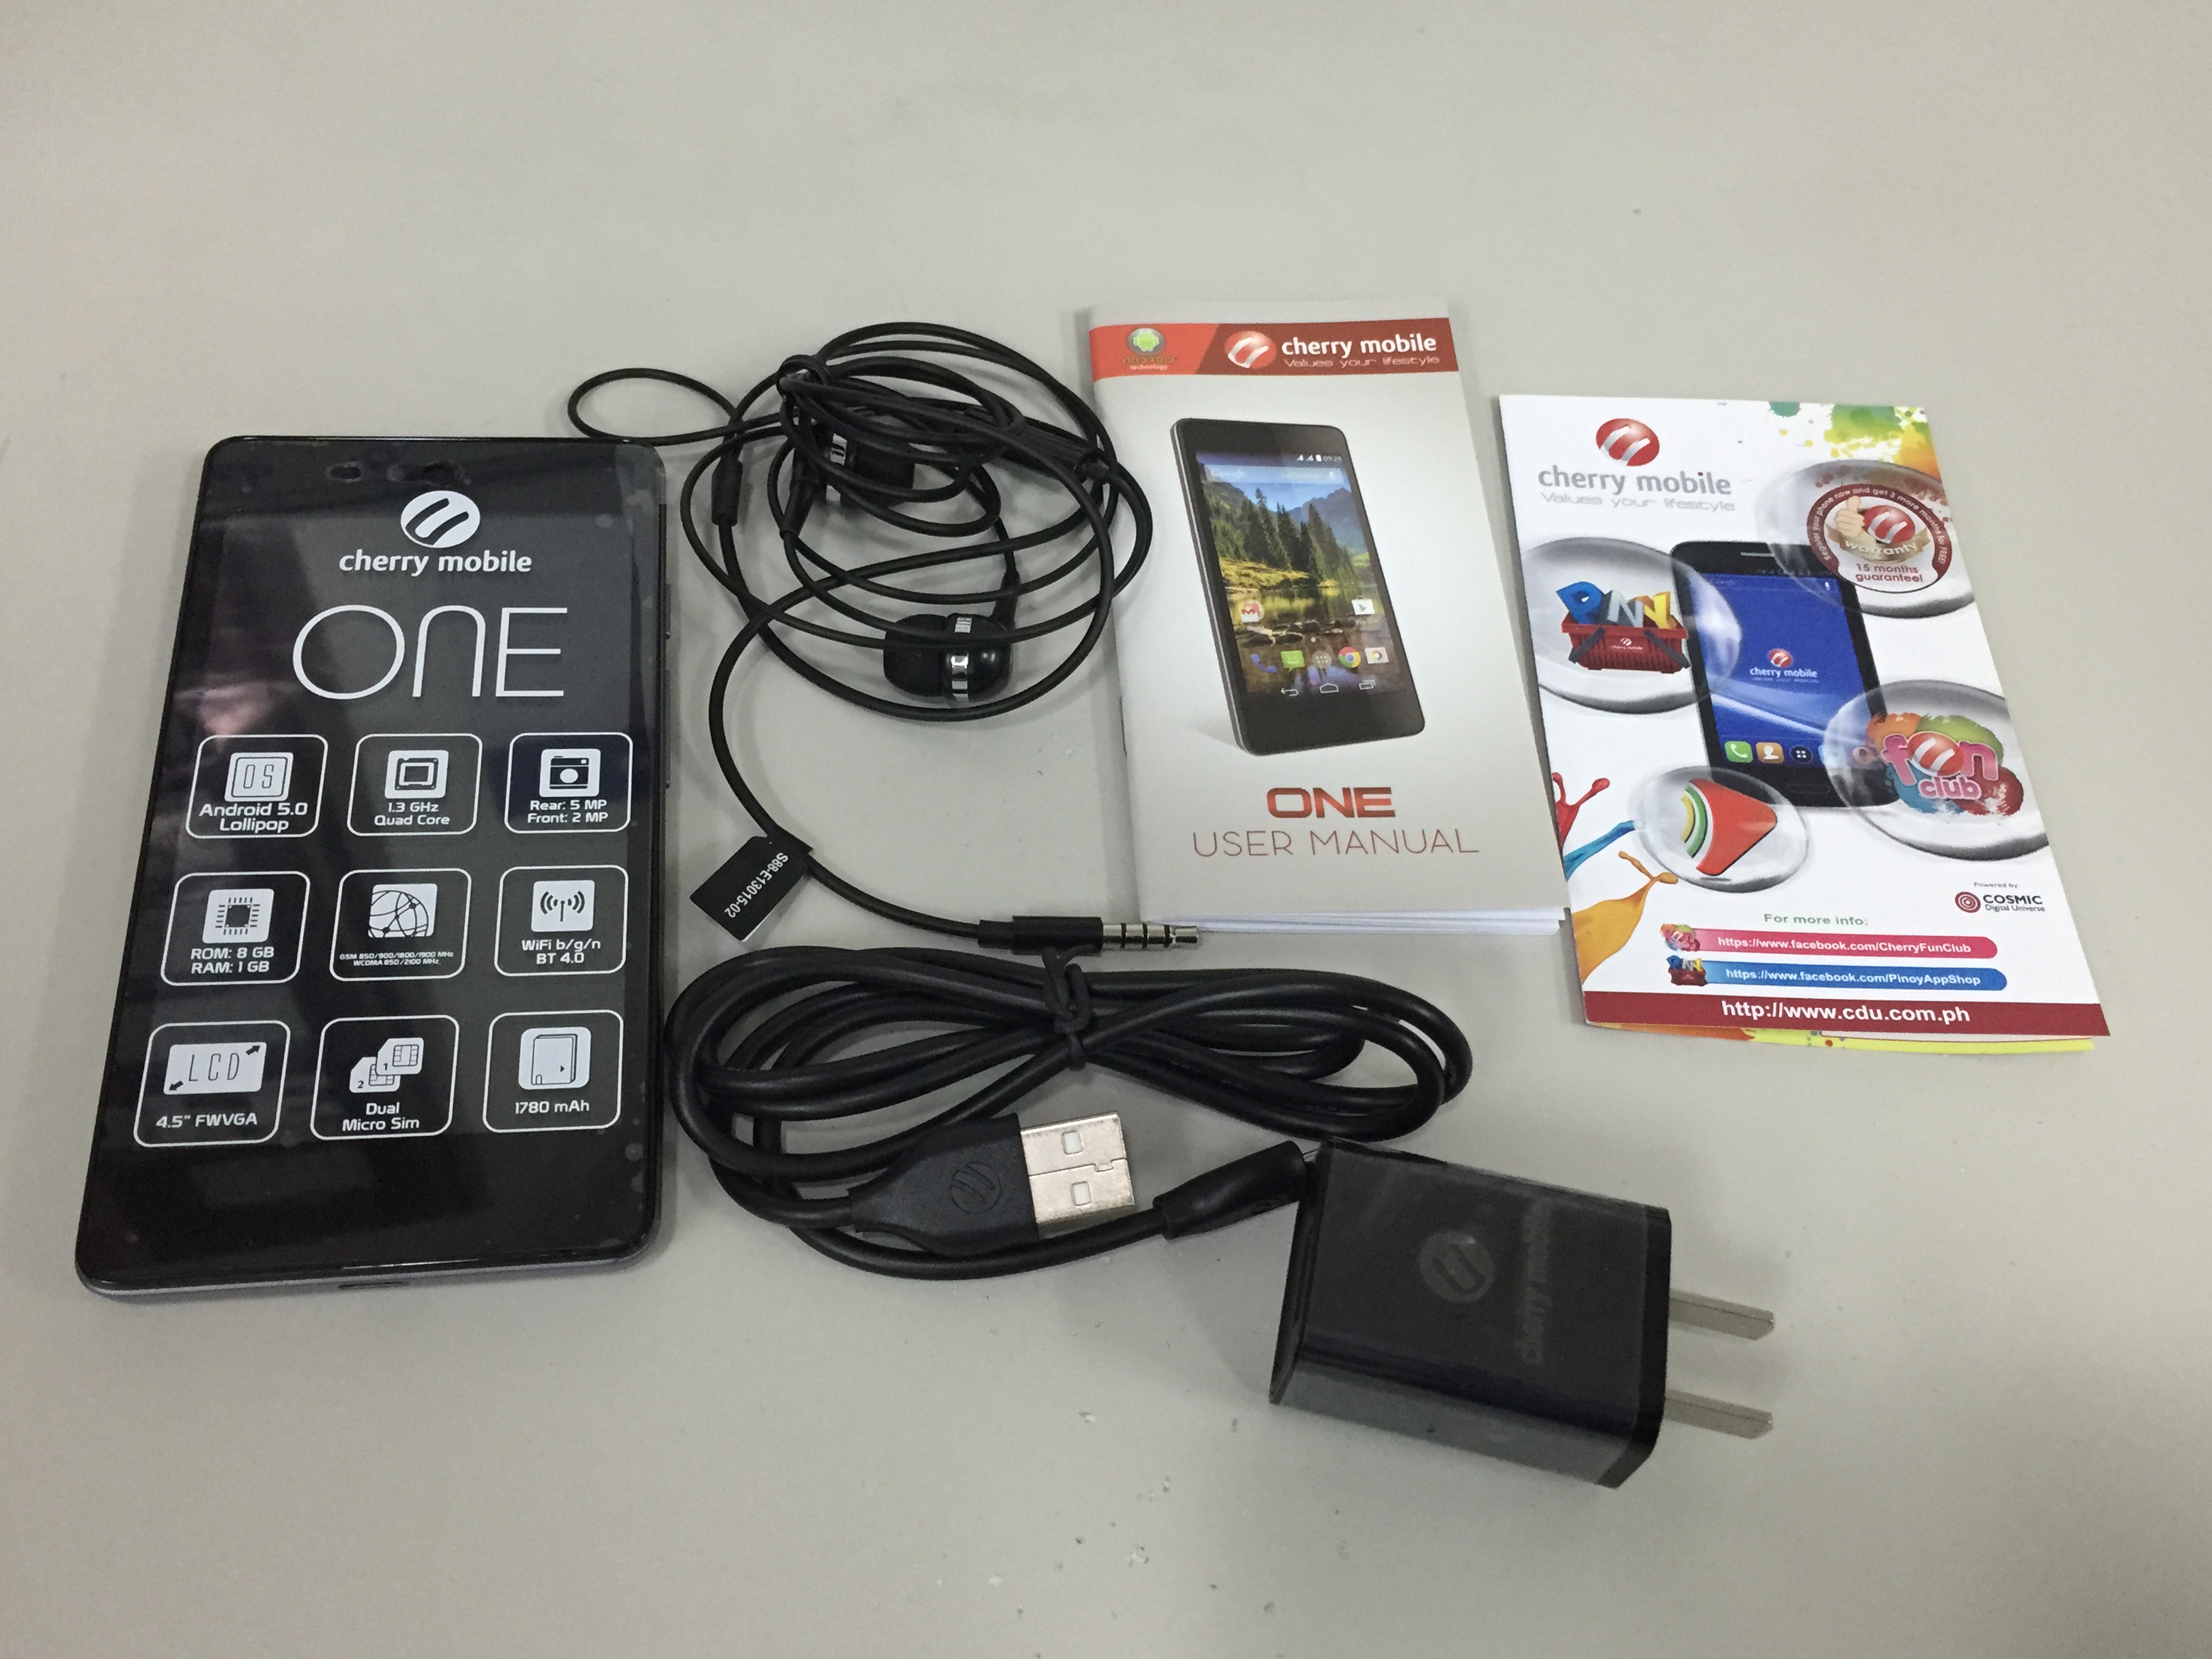 Unboxing the Cherry Mobile One Android smartphone running on 5.0 Lollipop